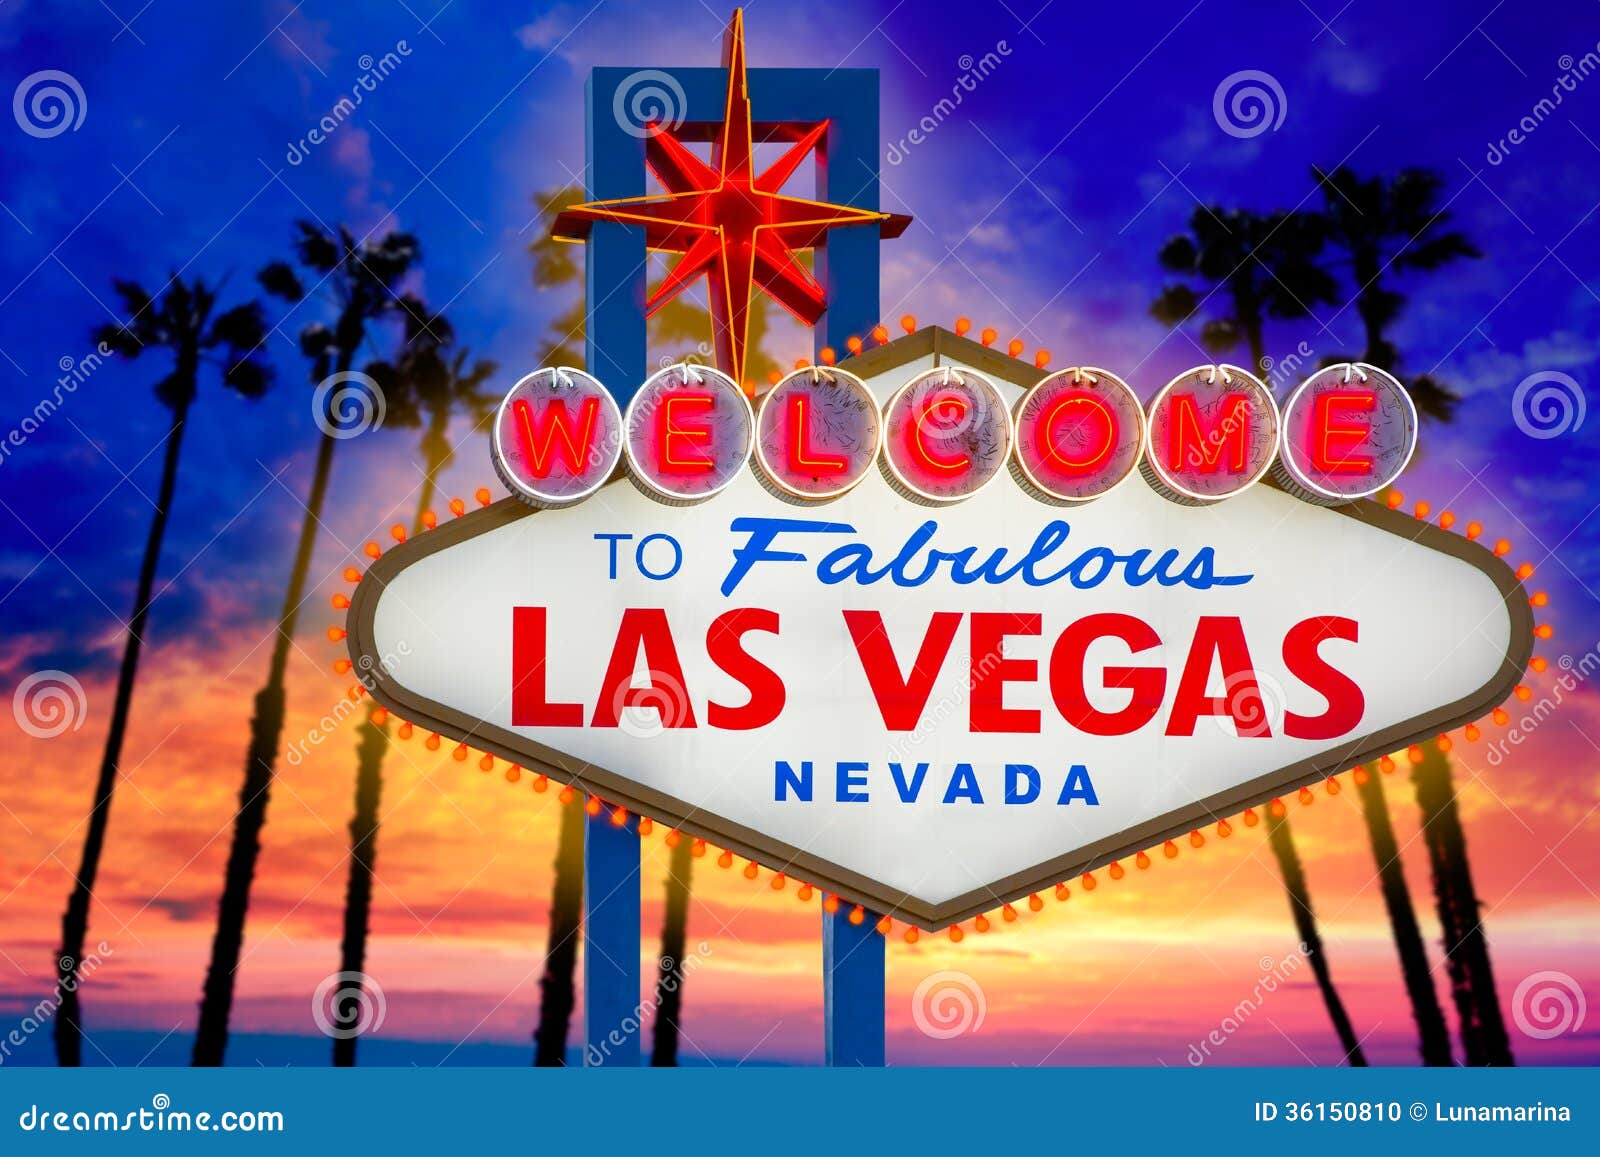 welcome fabulous las vegas sign sunset palm trees nevada